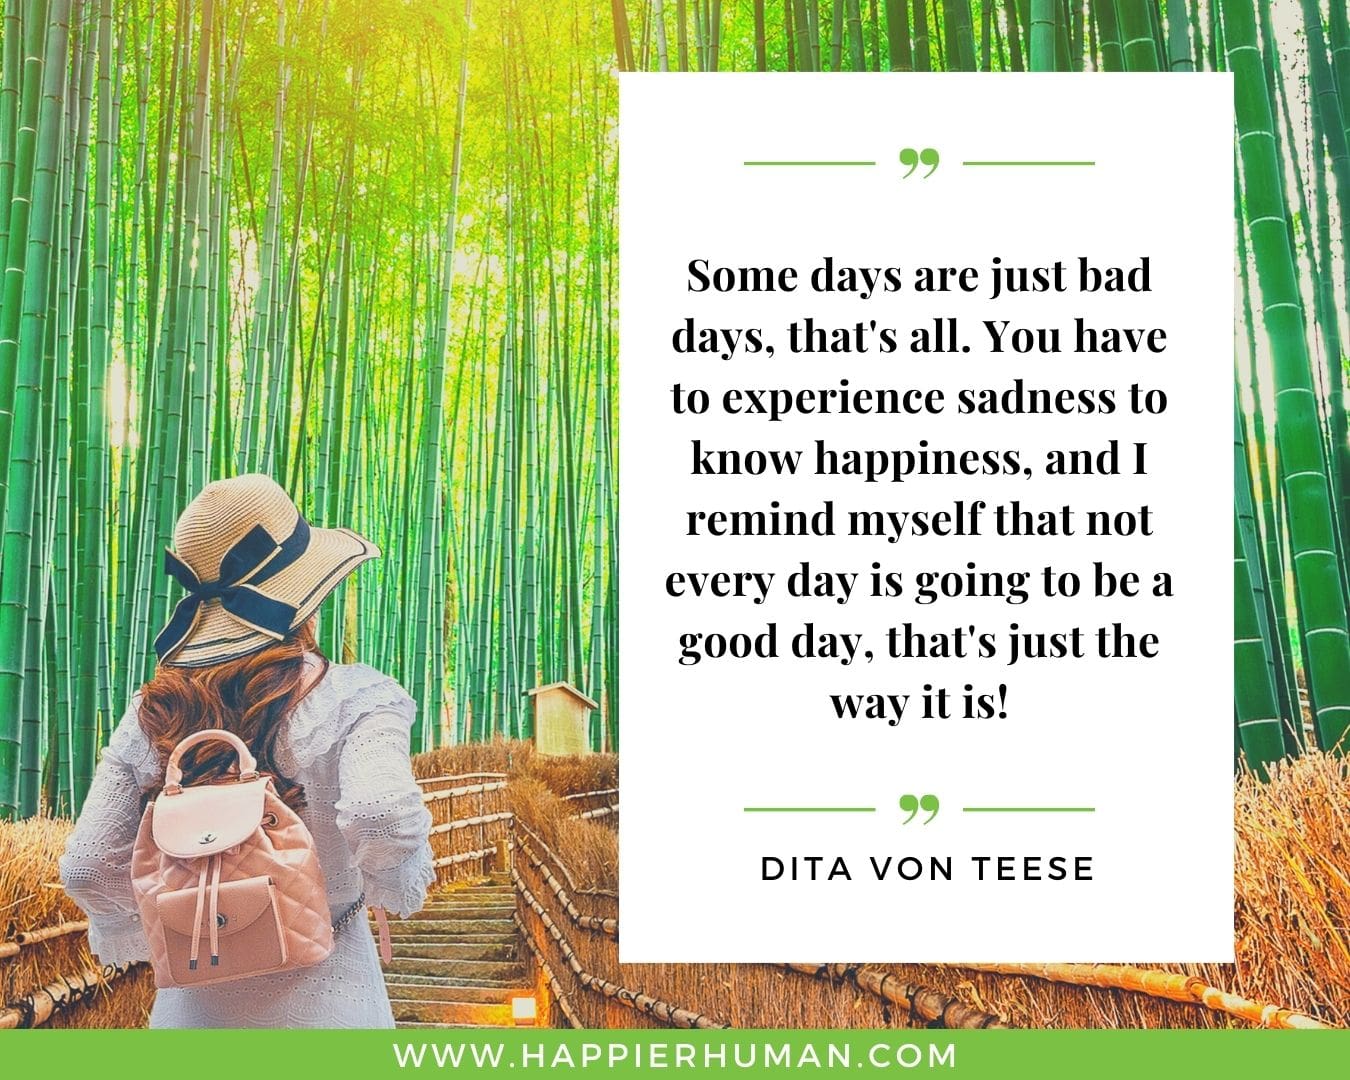 Great Day Quotes - “Some days are just bad days, that's all. You have to experience sadness to know happiness, and I remind myself that not every day is going to be a good day, that's just the way it is!” – Dita Von Teese